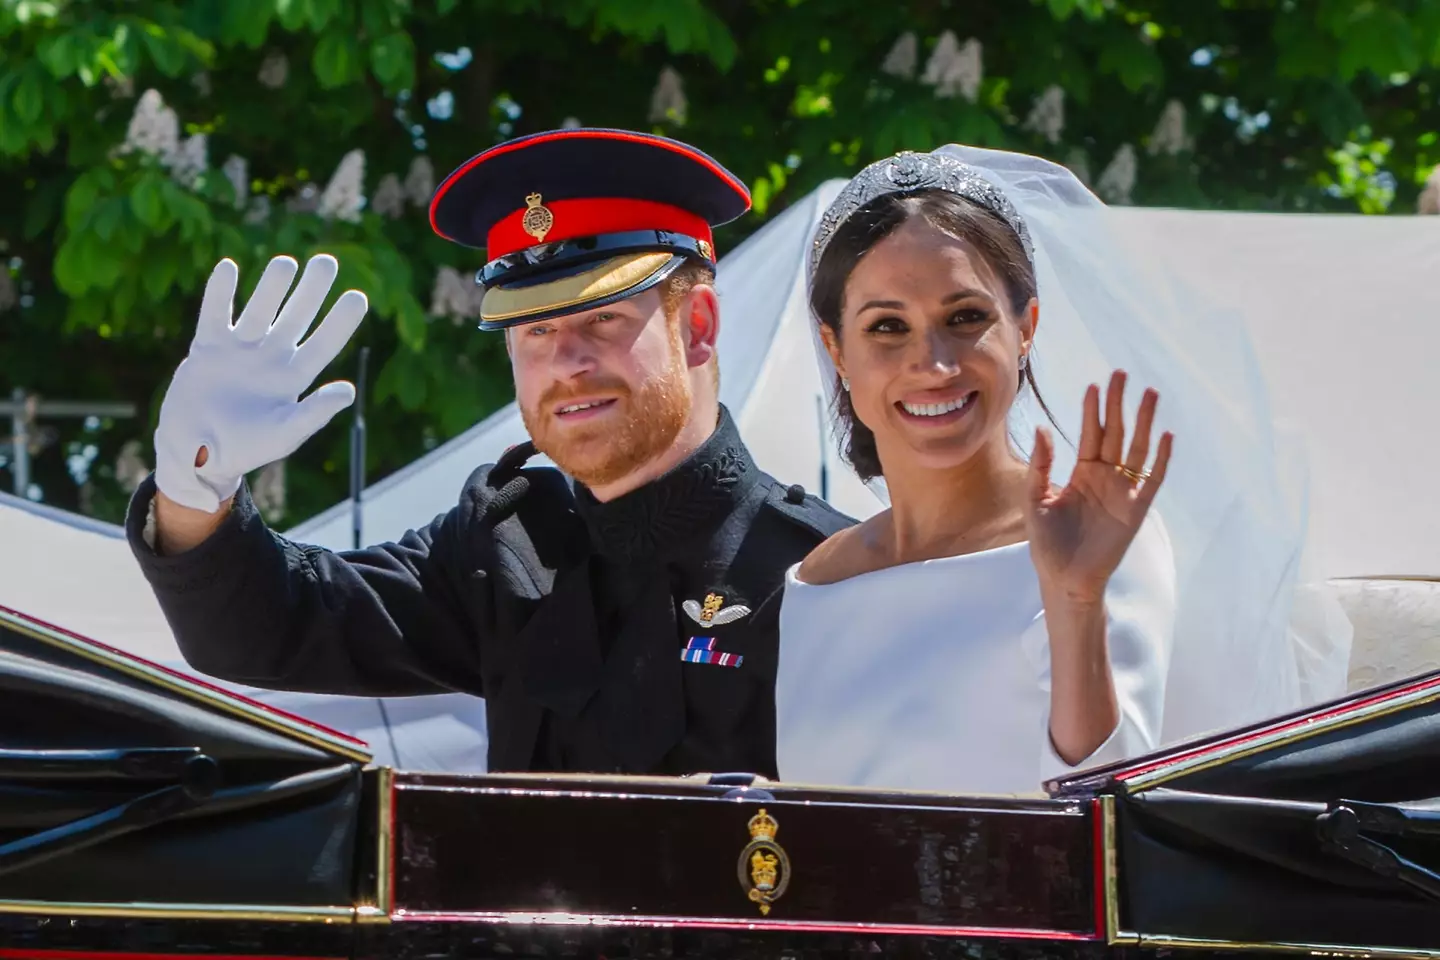 Prince Harry and Meghan Markle were involved in a 'near catastrophic car chase' on Tuesday (16 May).